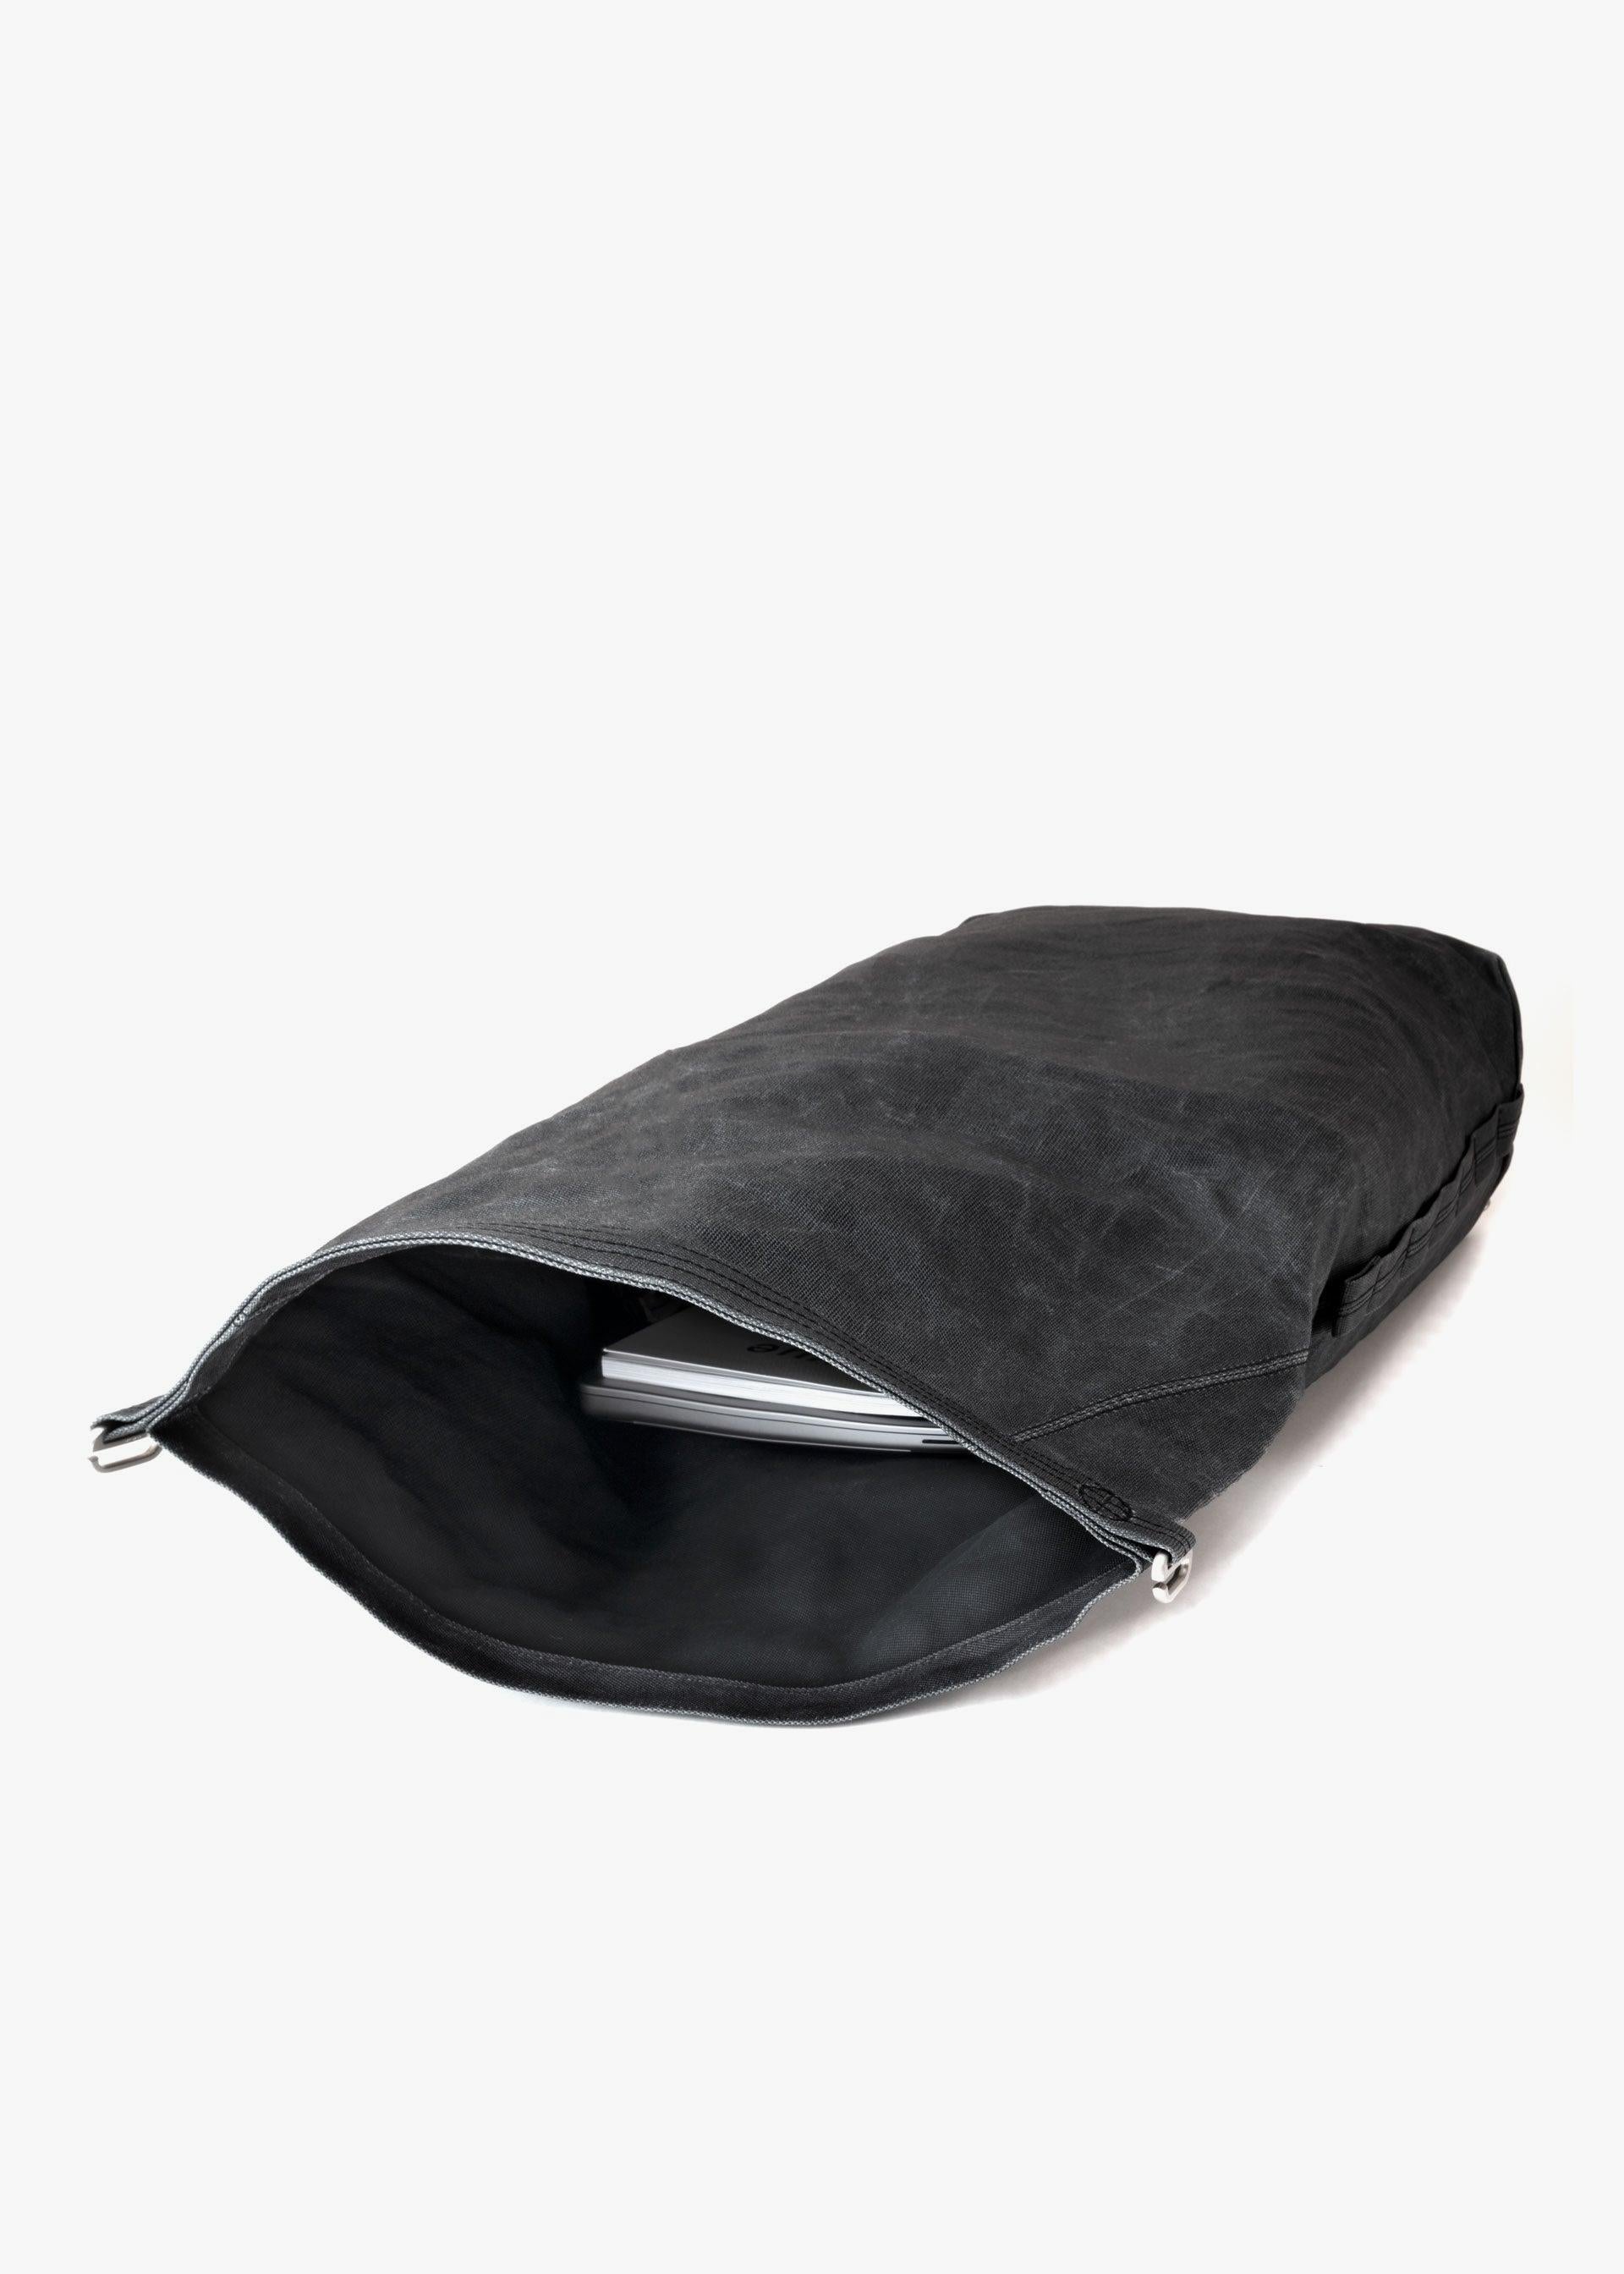 Roll Pack – Waxed Black